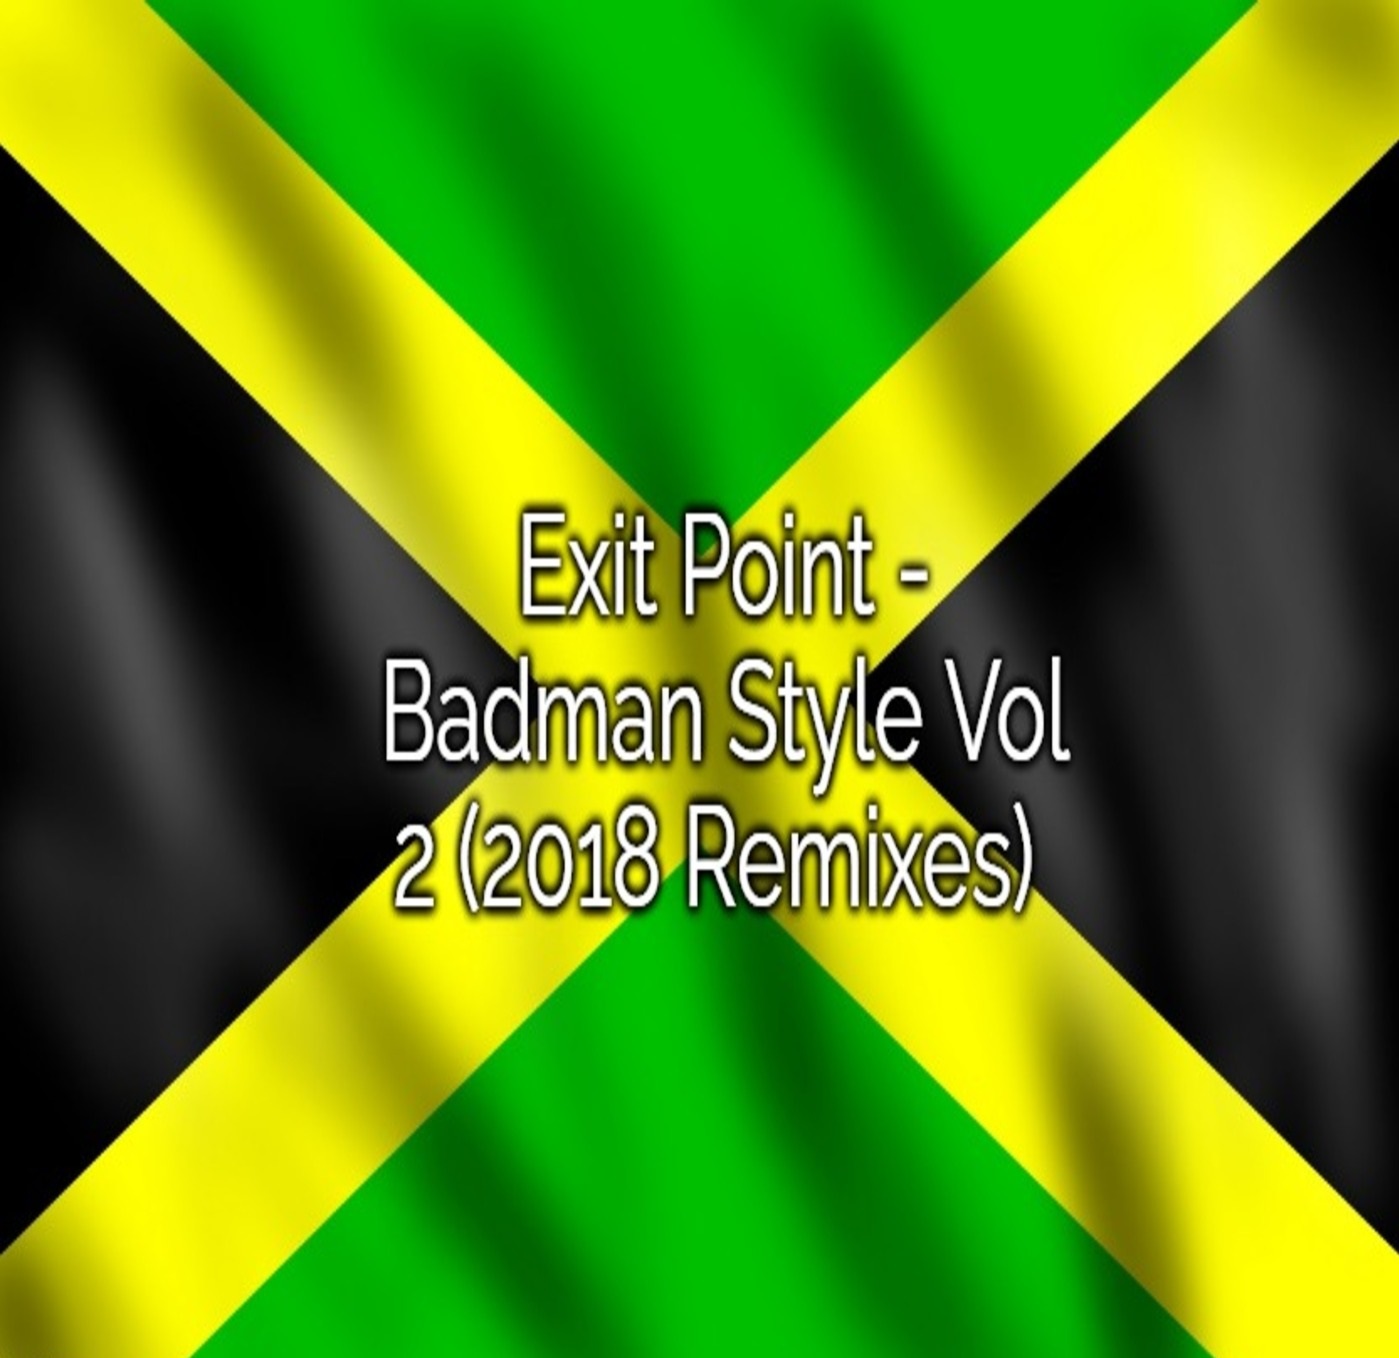 View Track : Exit Point - Badman Style (Sniper Remix)